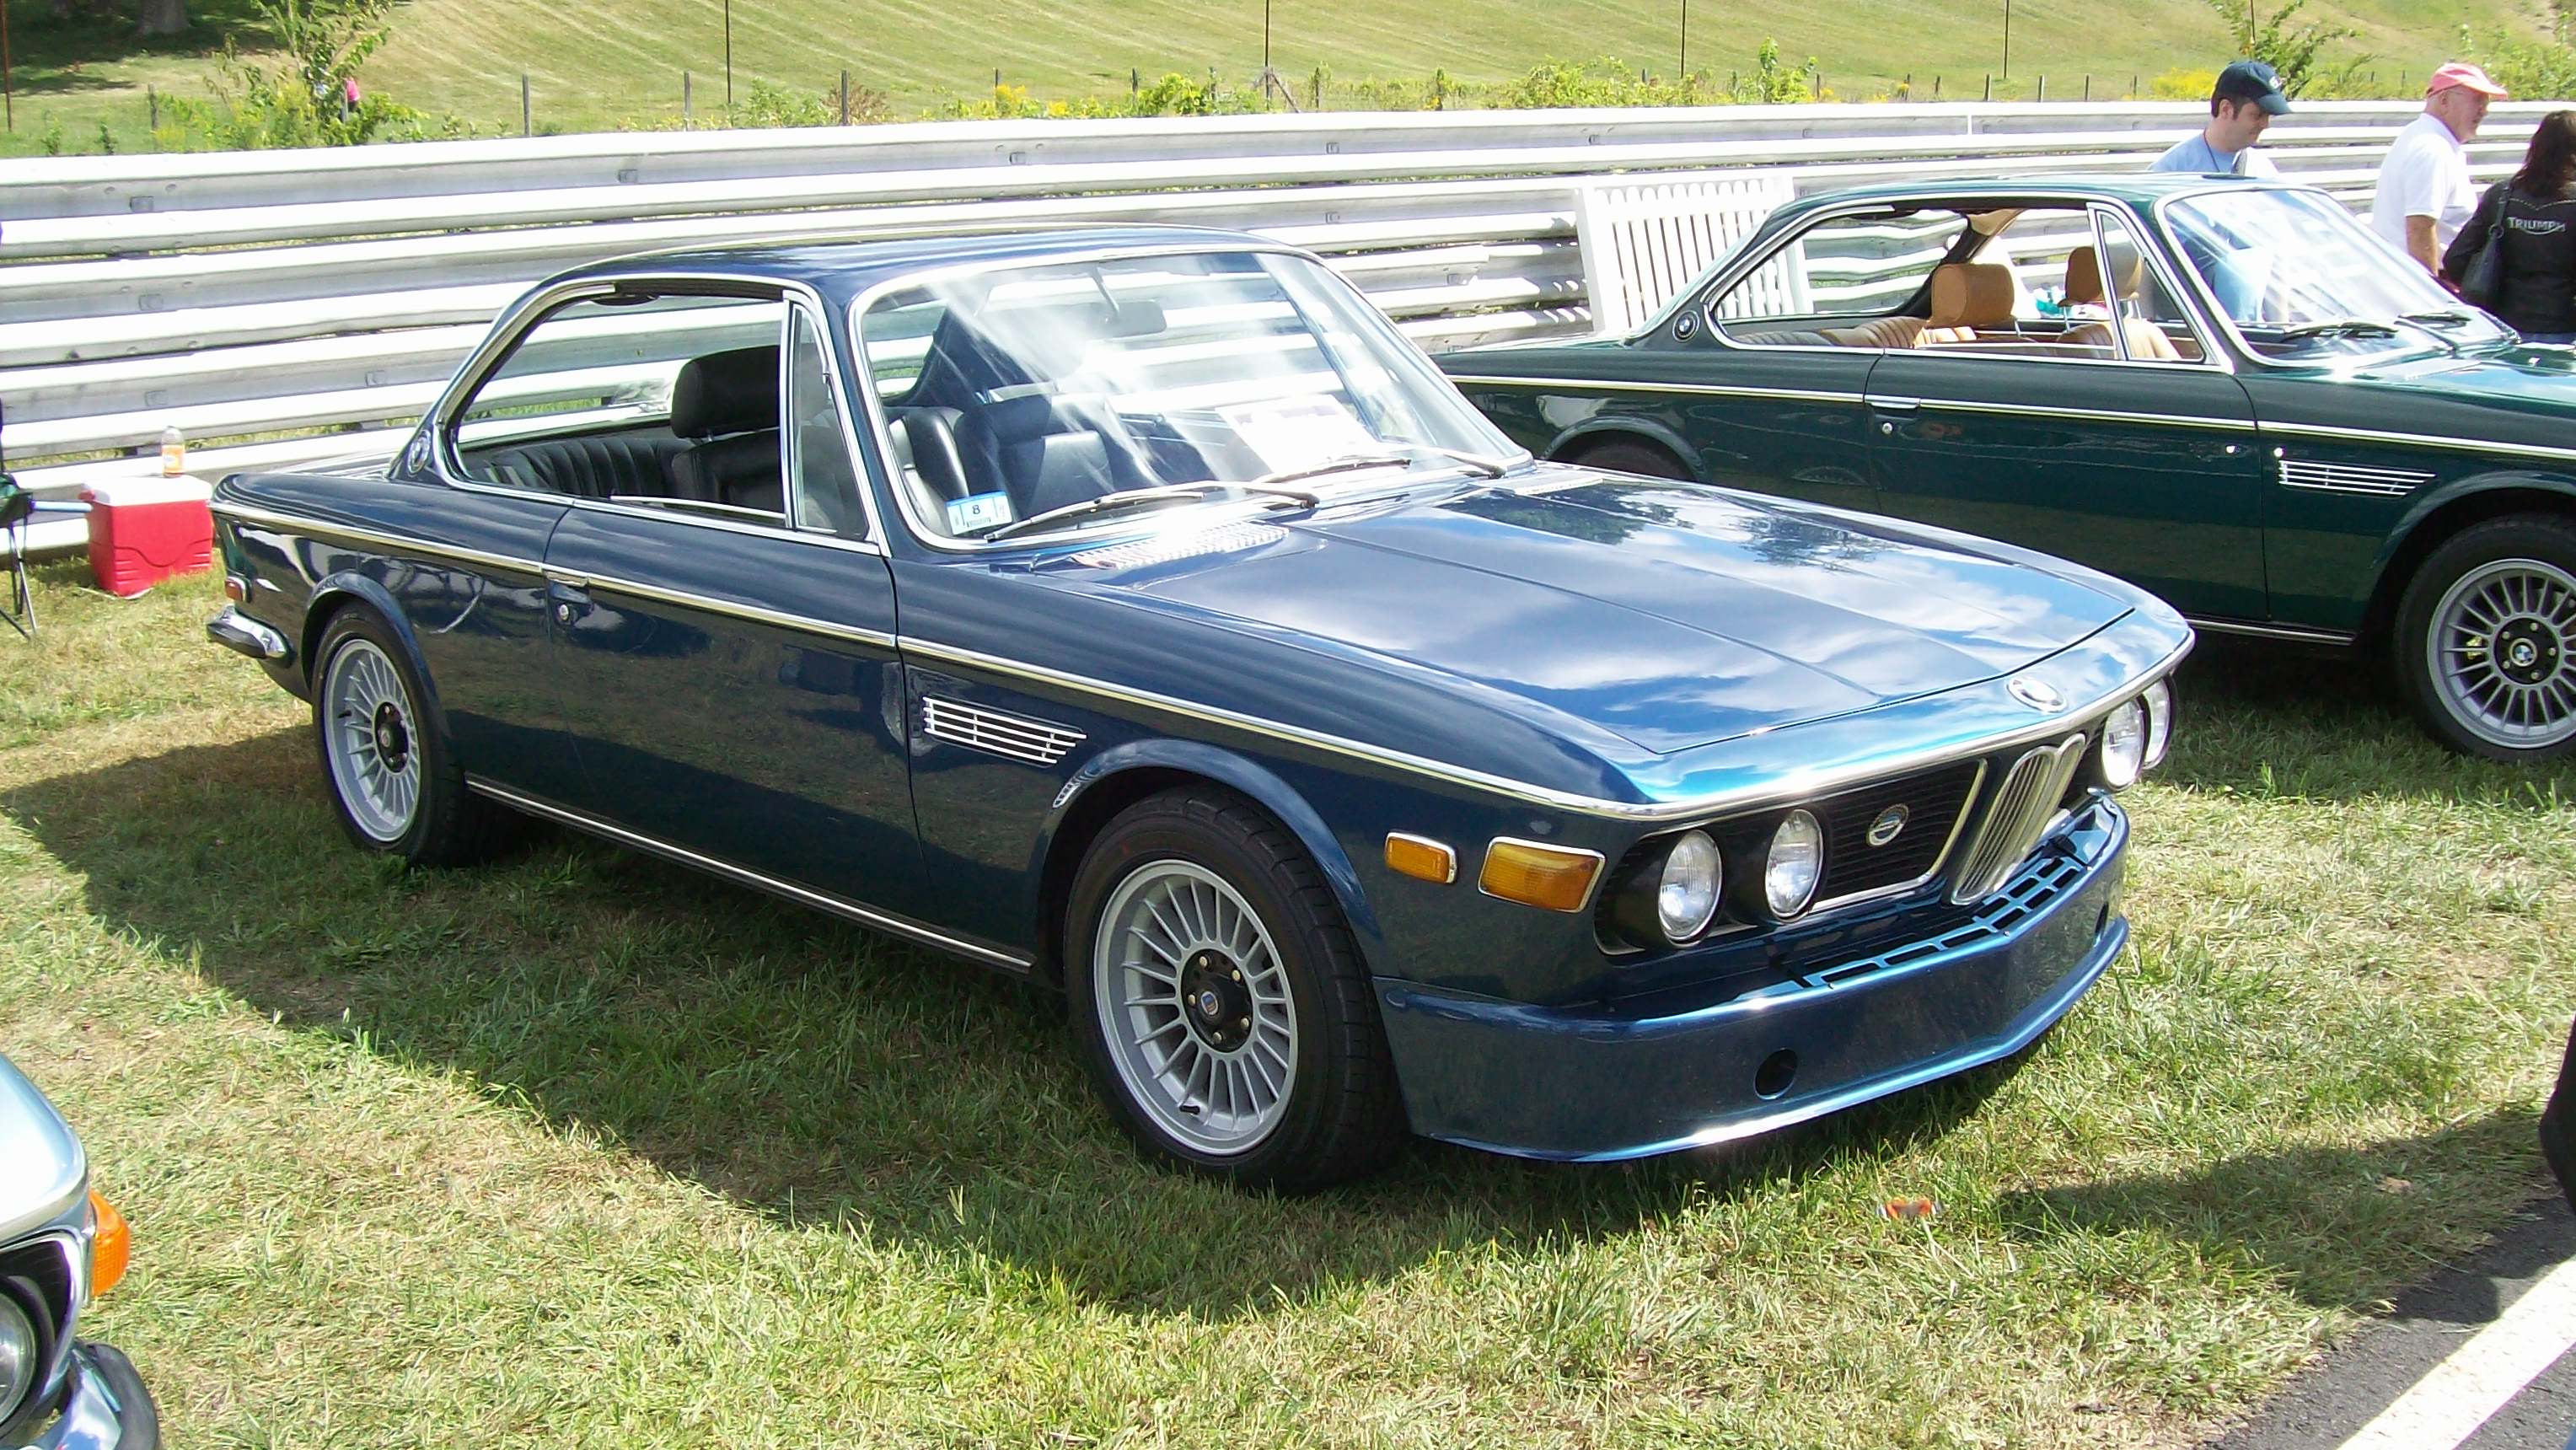 The BMW 3.0 CSL and Similar BMW Models of the Early 70s